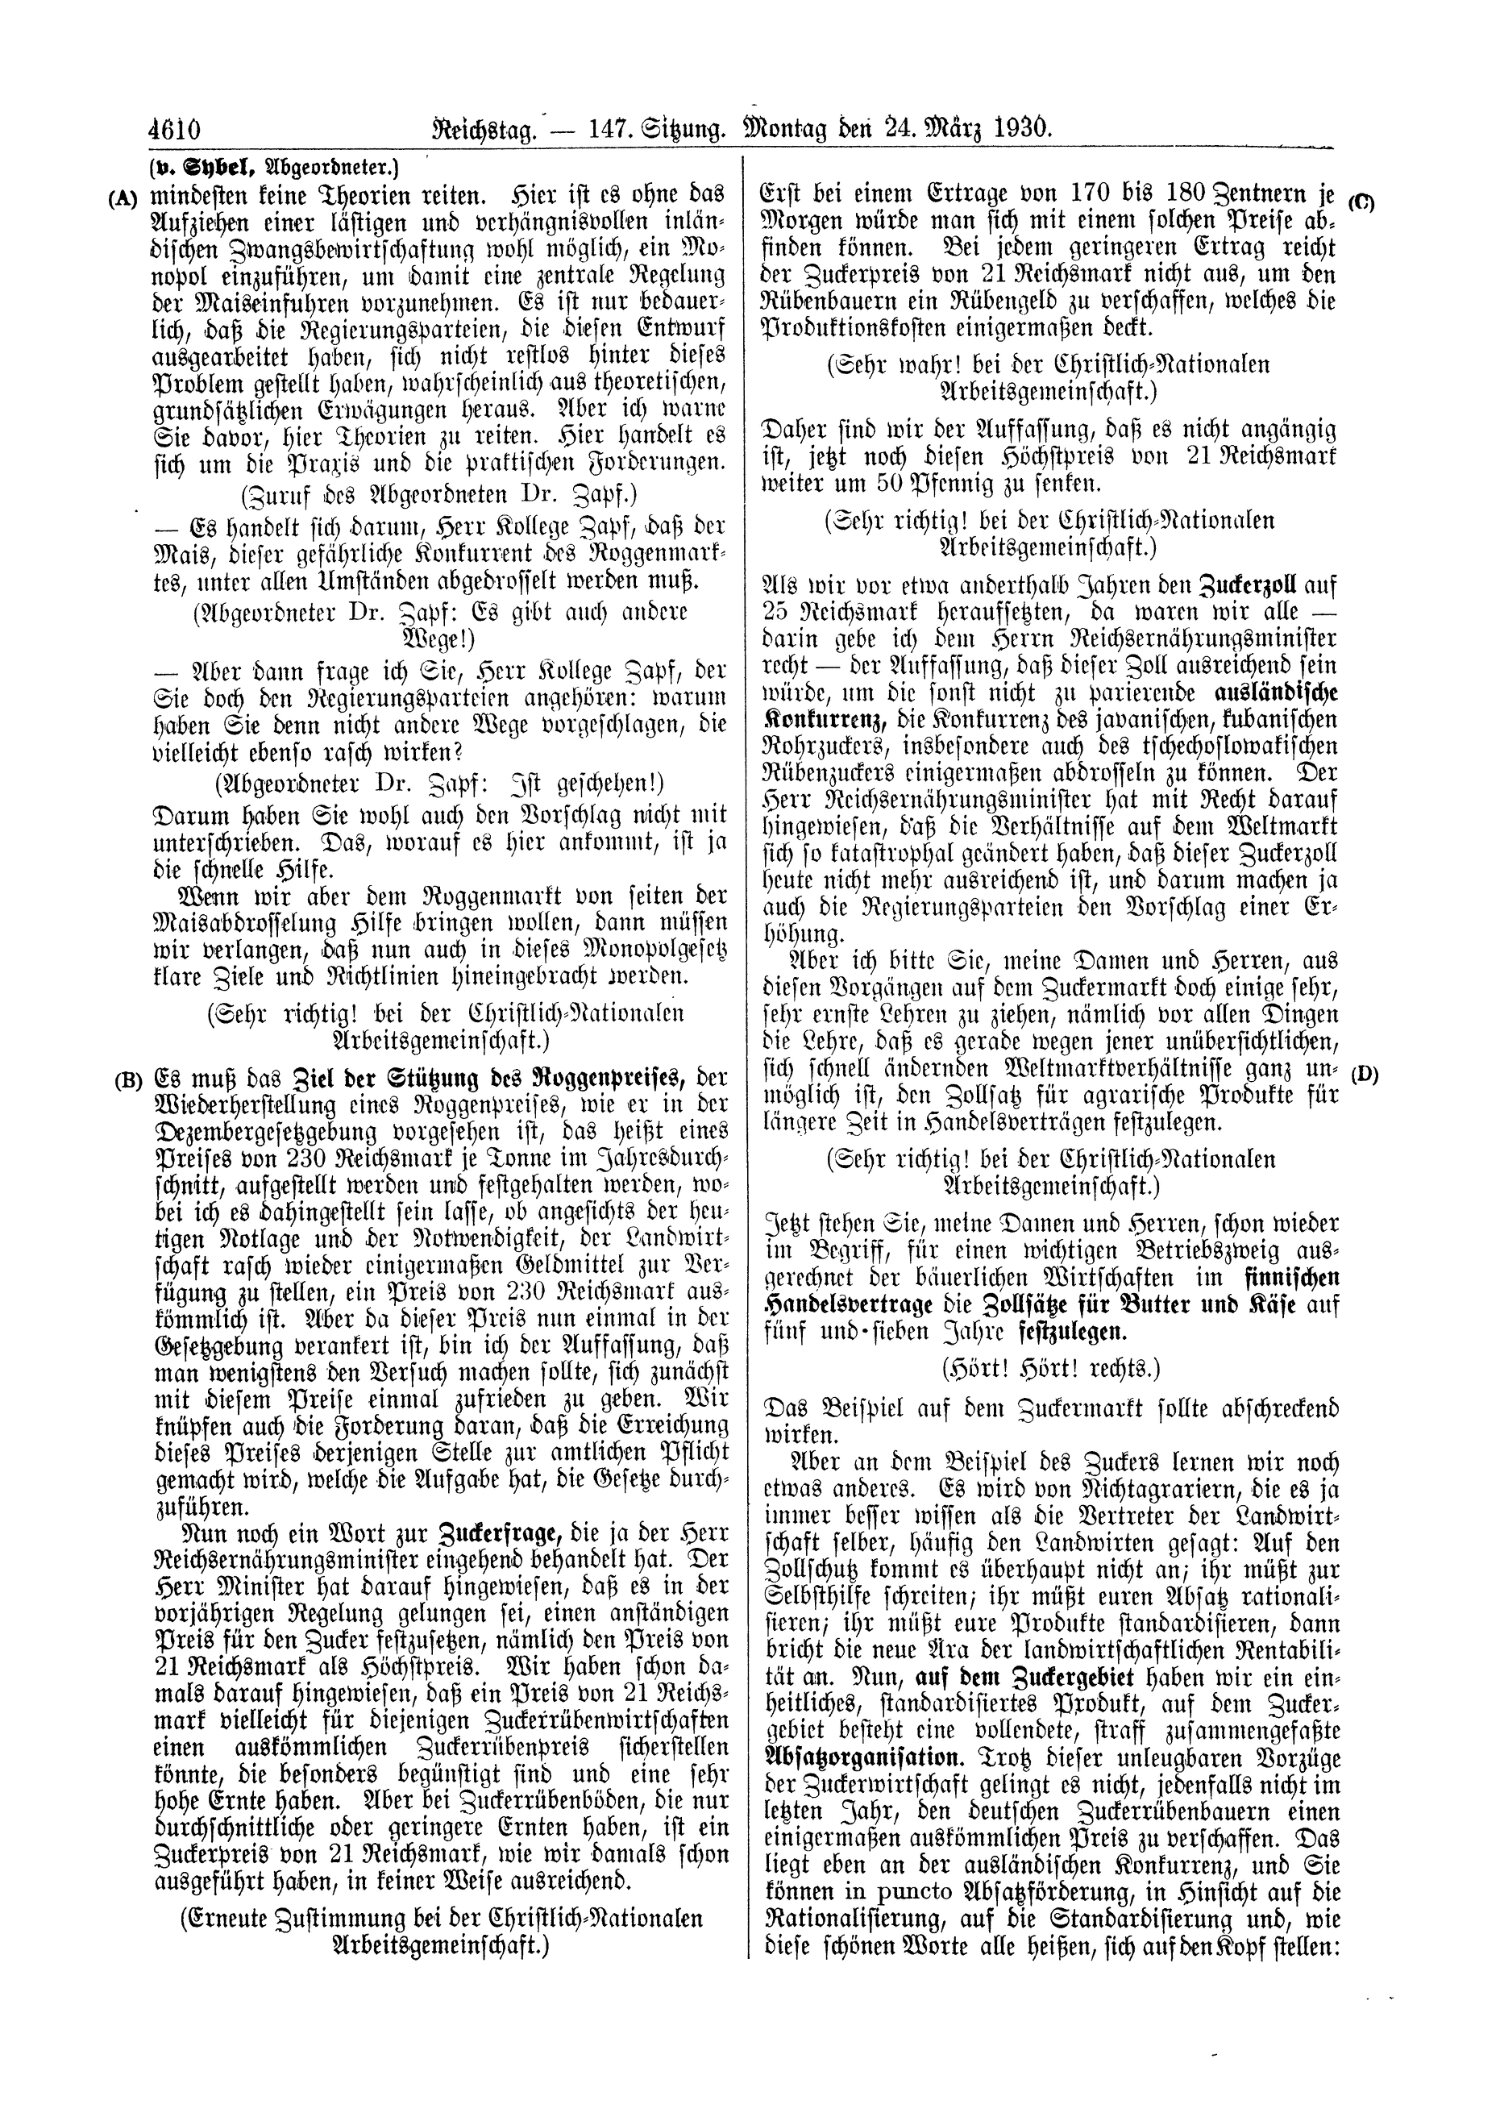 Scan of page 4610